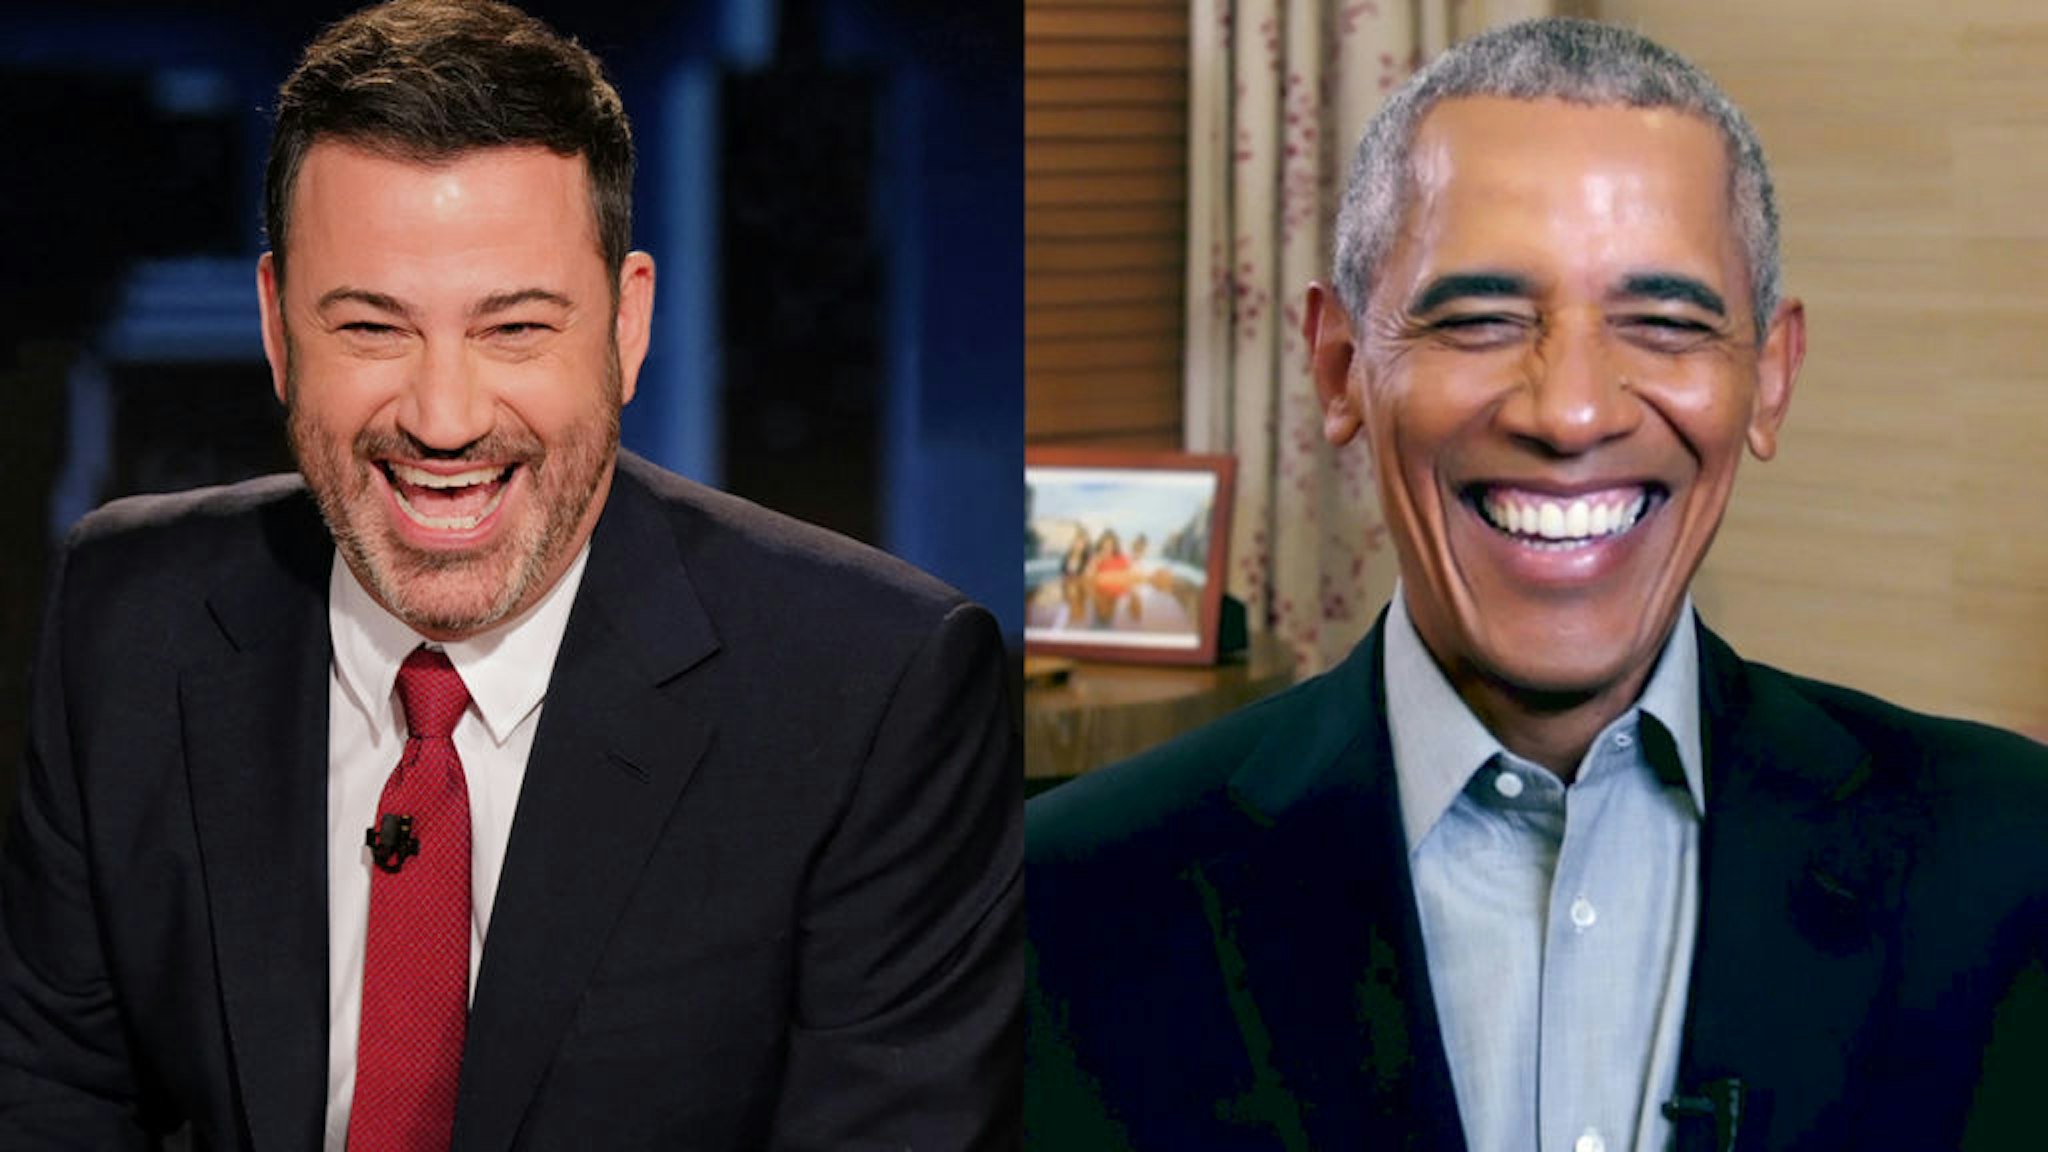 "Jimmy Kimmel Live!" airs every weeknight at 11:35 p.m. EST and features a diverse lineup of guests that include celebrities, athletes, musical acts, comedians and human interest subjects, along with comedy bits and a house band. The guests for Thursday, November 19, included President Barack Obama